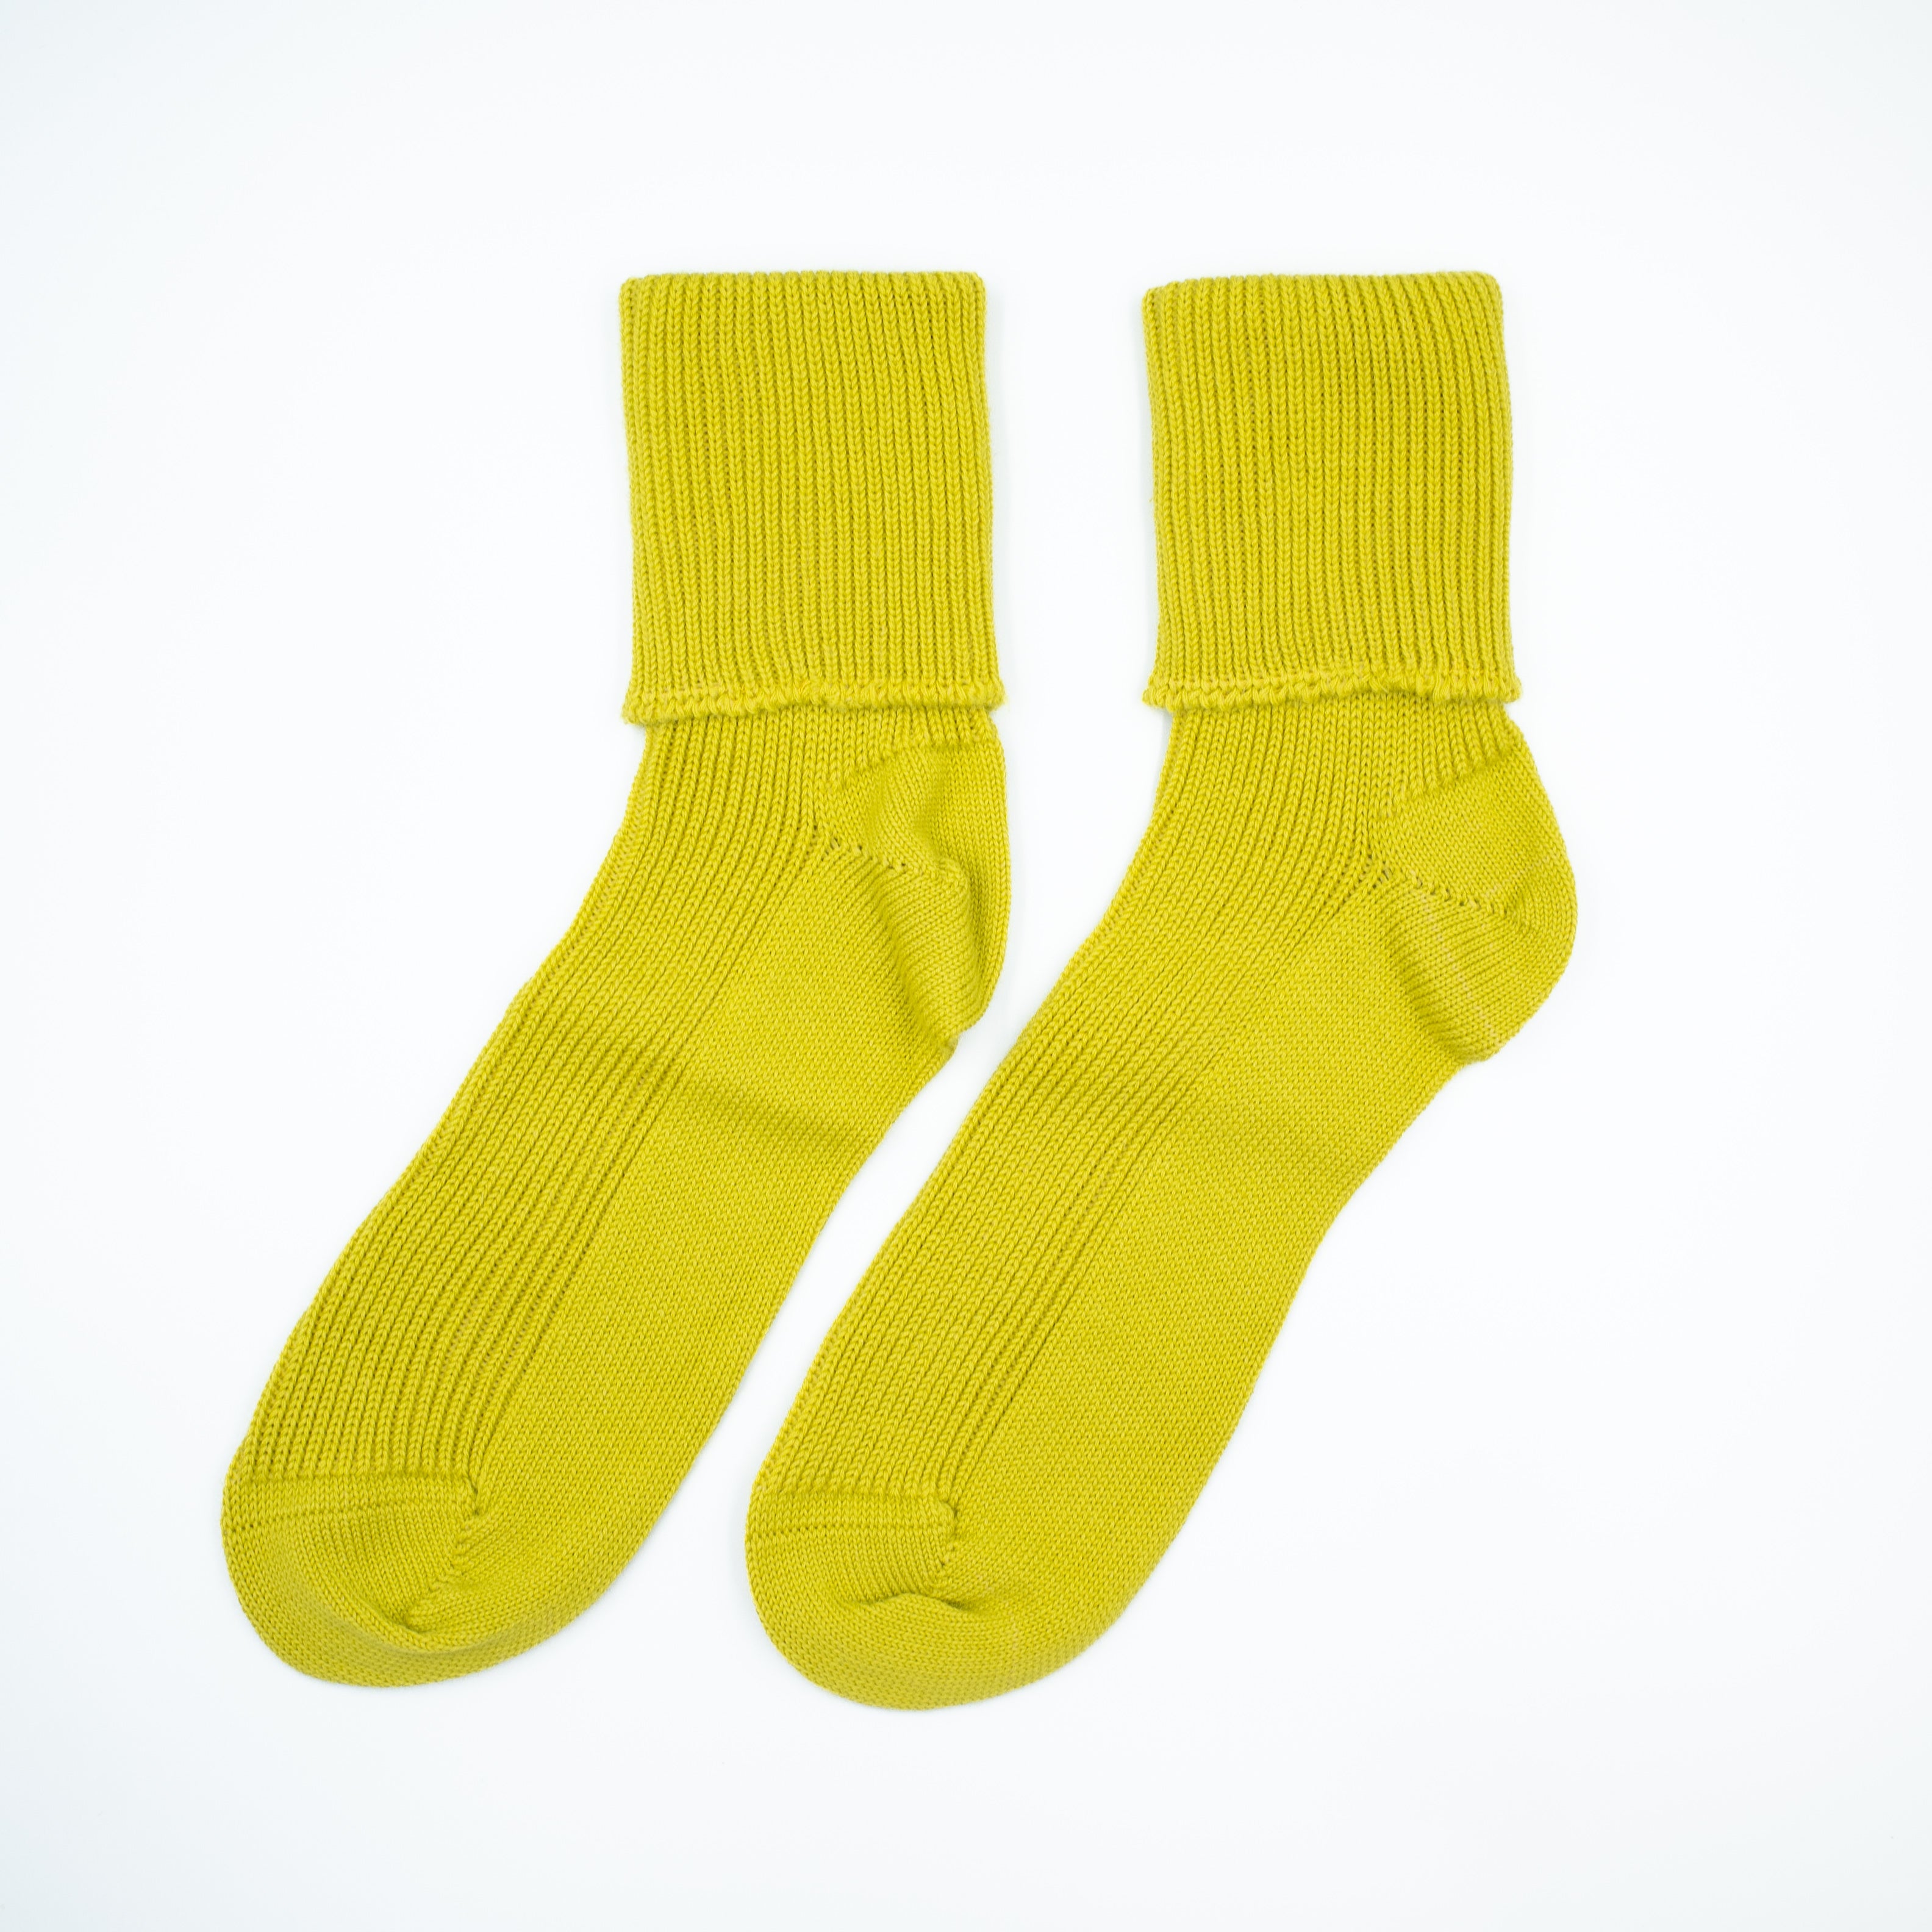 New Scottish Chartreuse Yellow Cashmere Every Day Socks